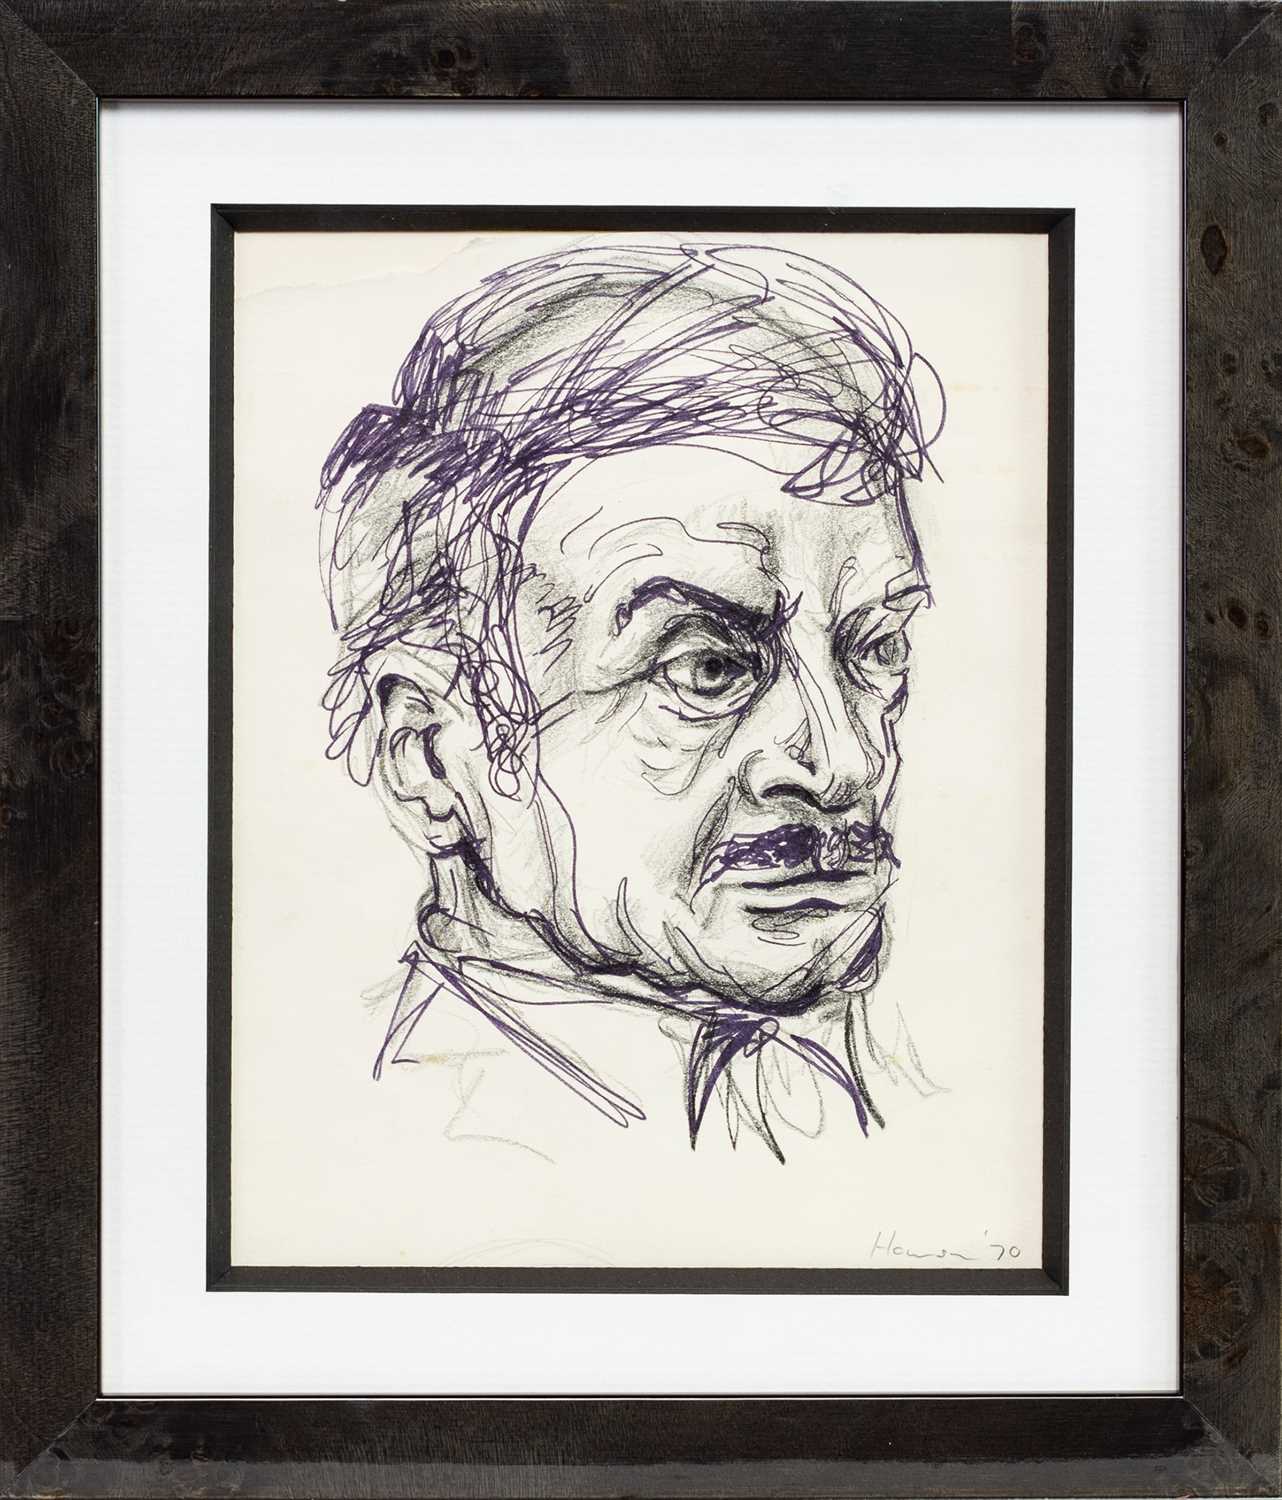 Lot 680 - AN EARLY SKETCH OF A MAN'S HEAD BY PETER HOWSON